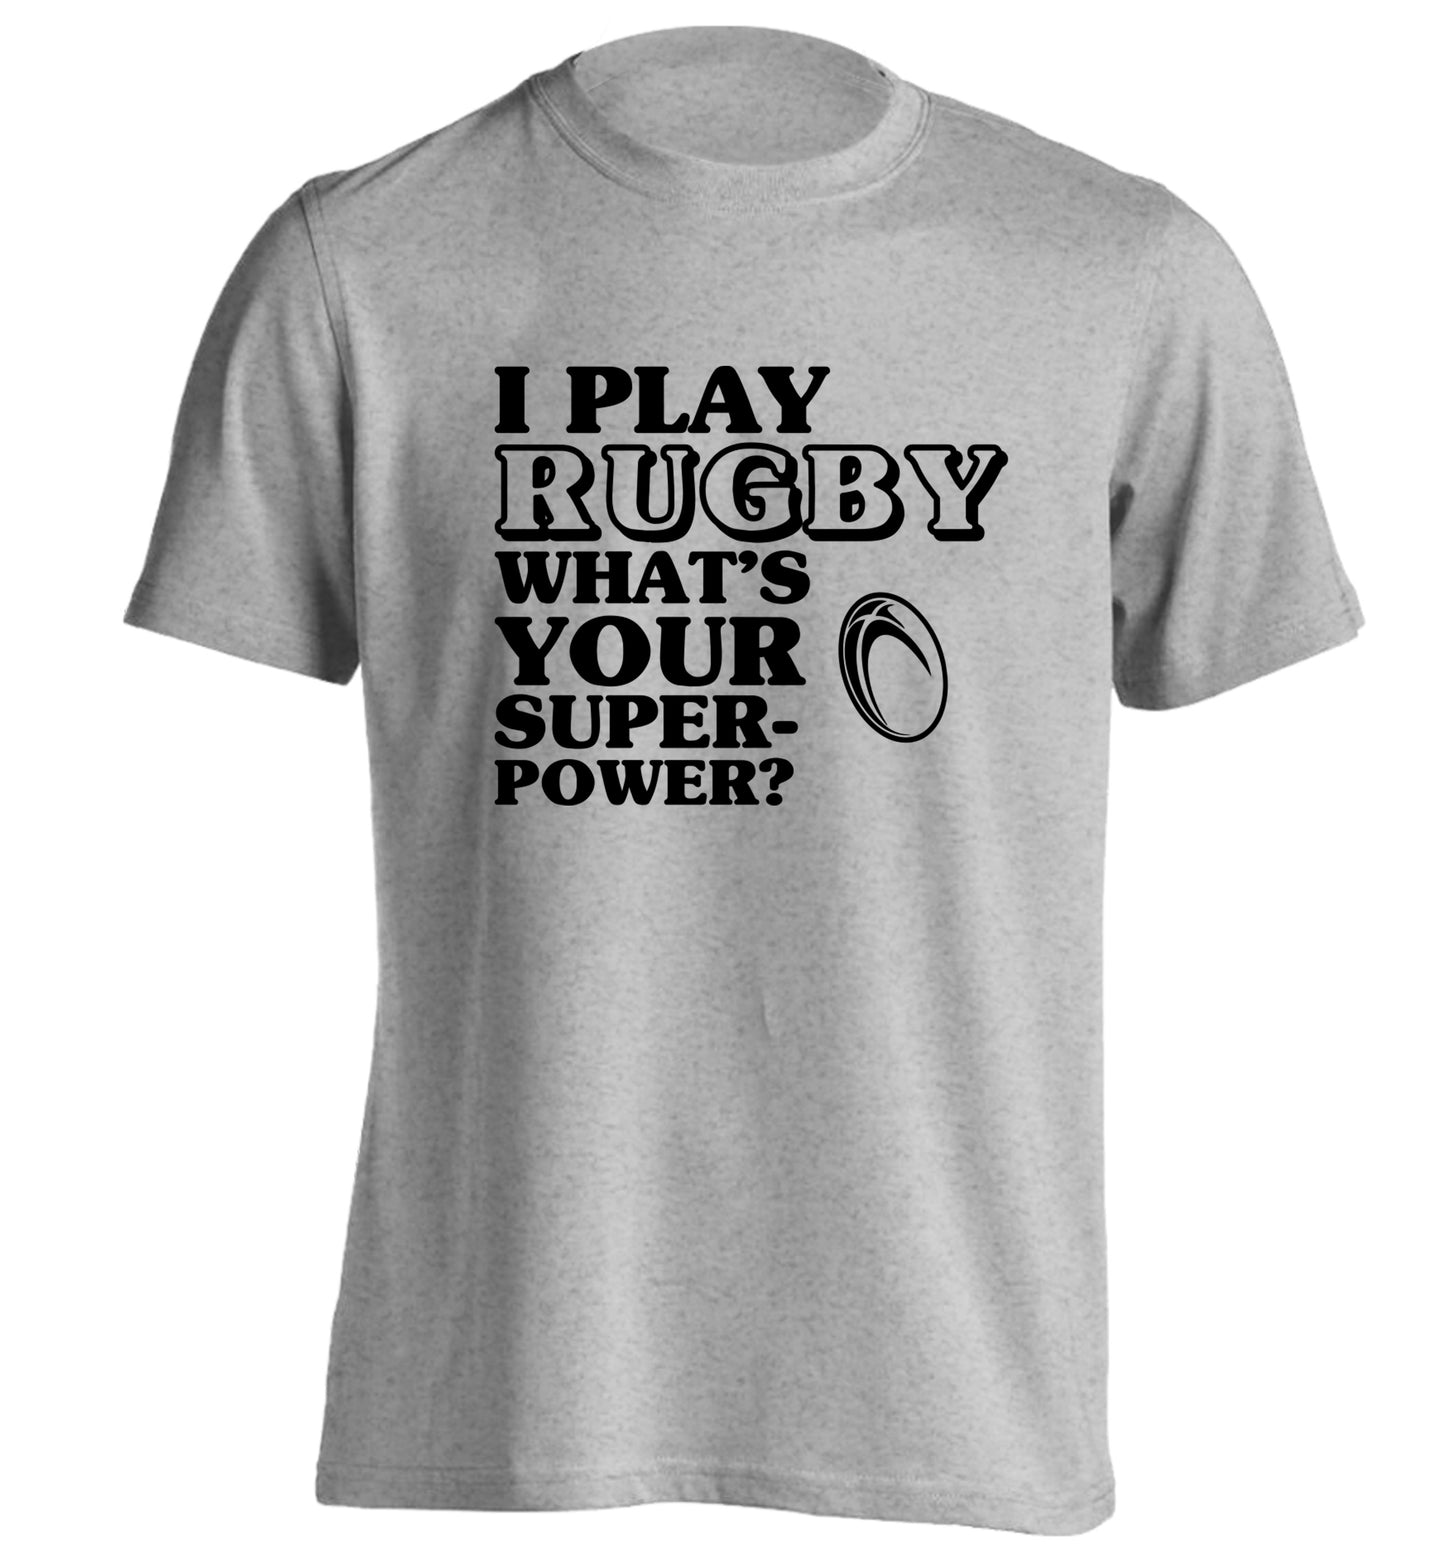 I play rugby what's your superpower? adults unisex grey Tshirt 2XL